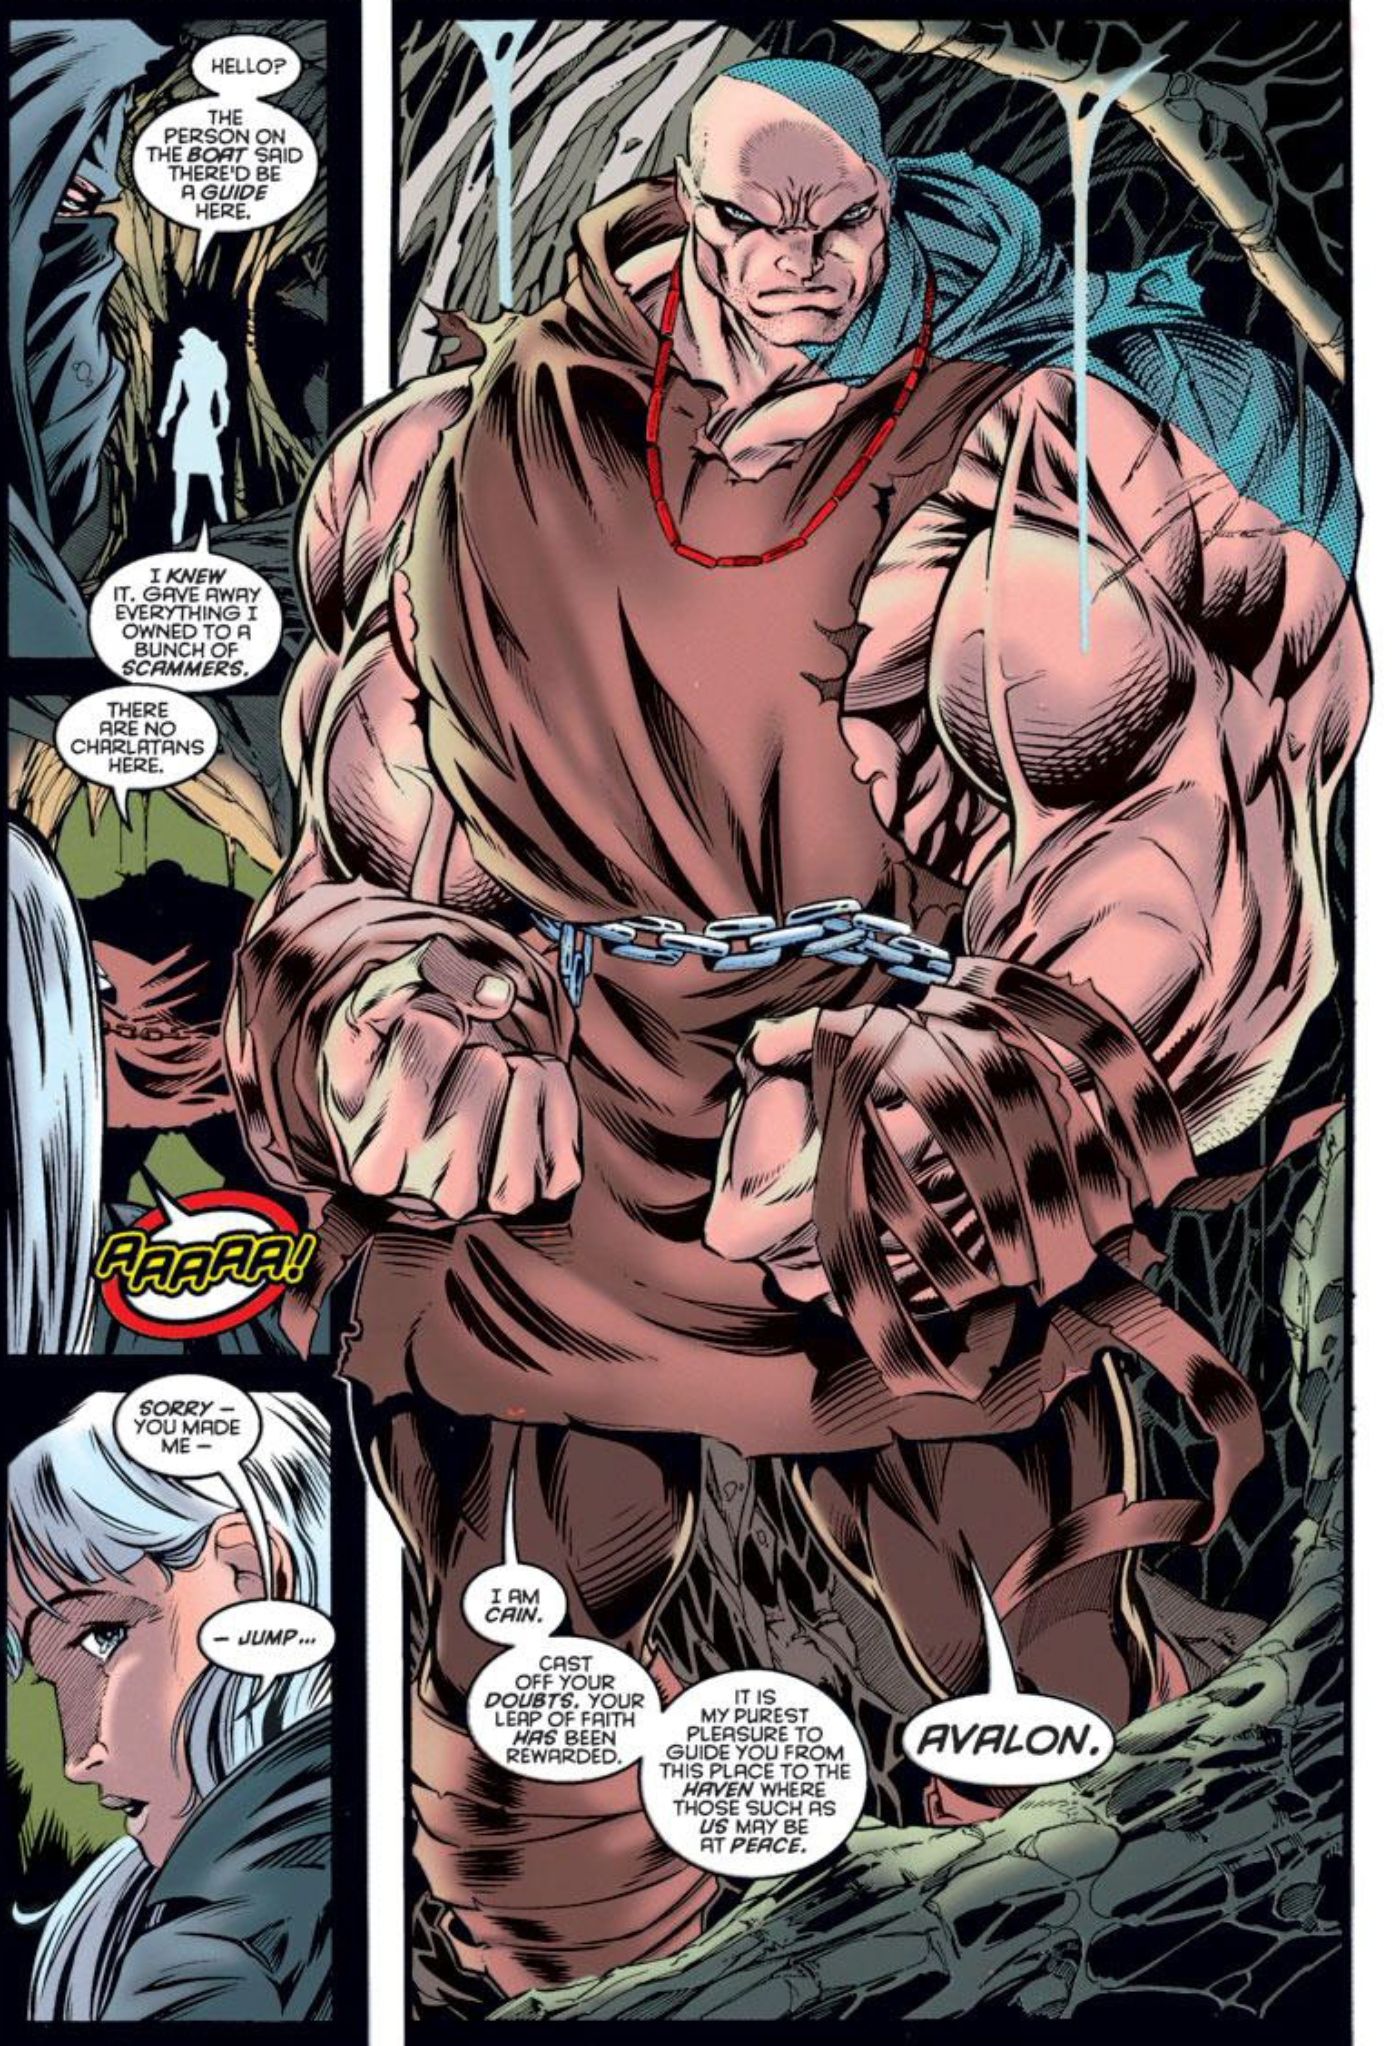 The Juggernaut found redemption in the Age of Apocalypse.